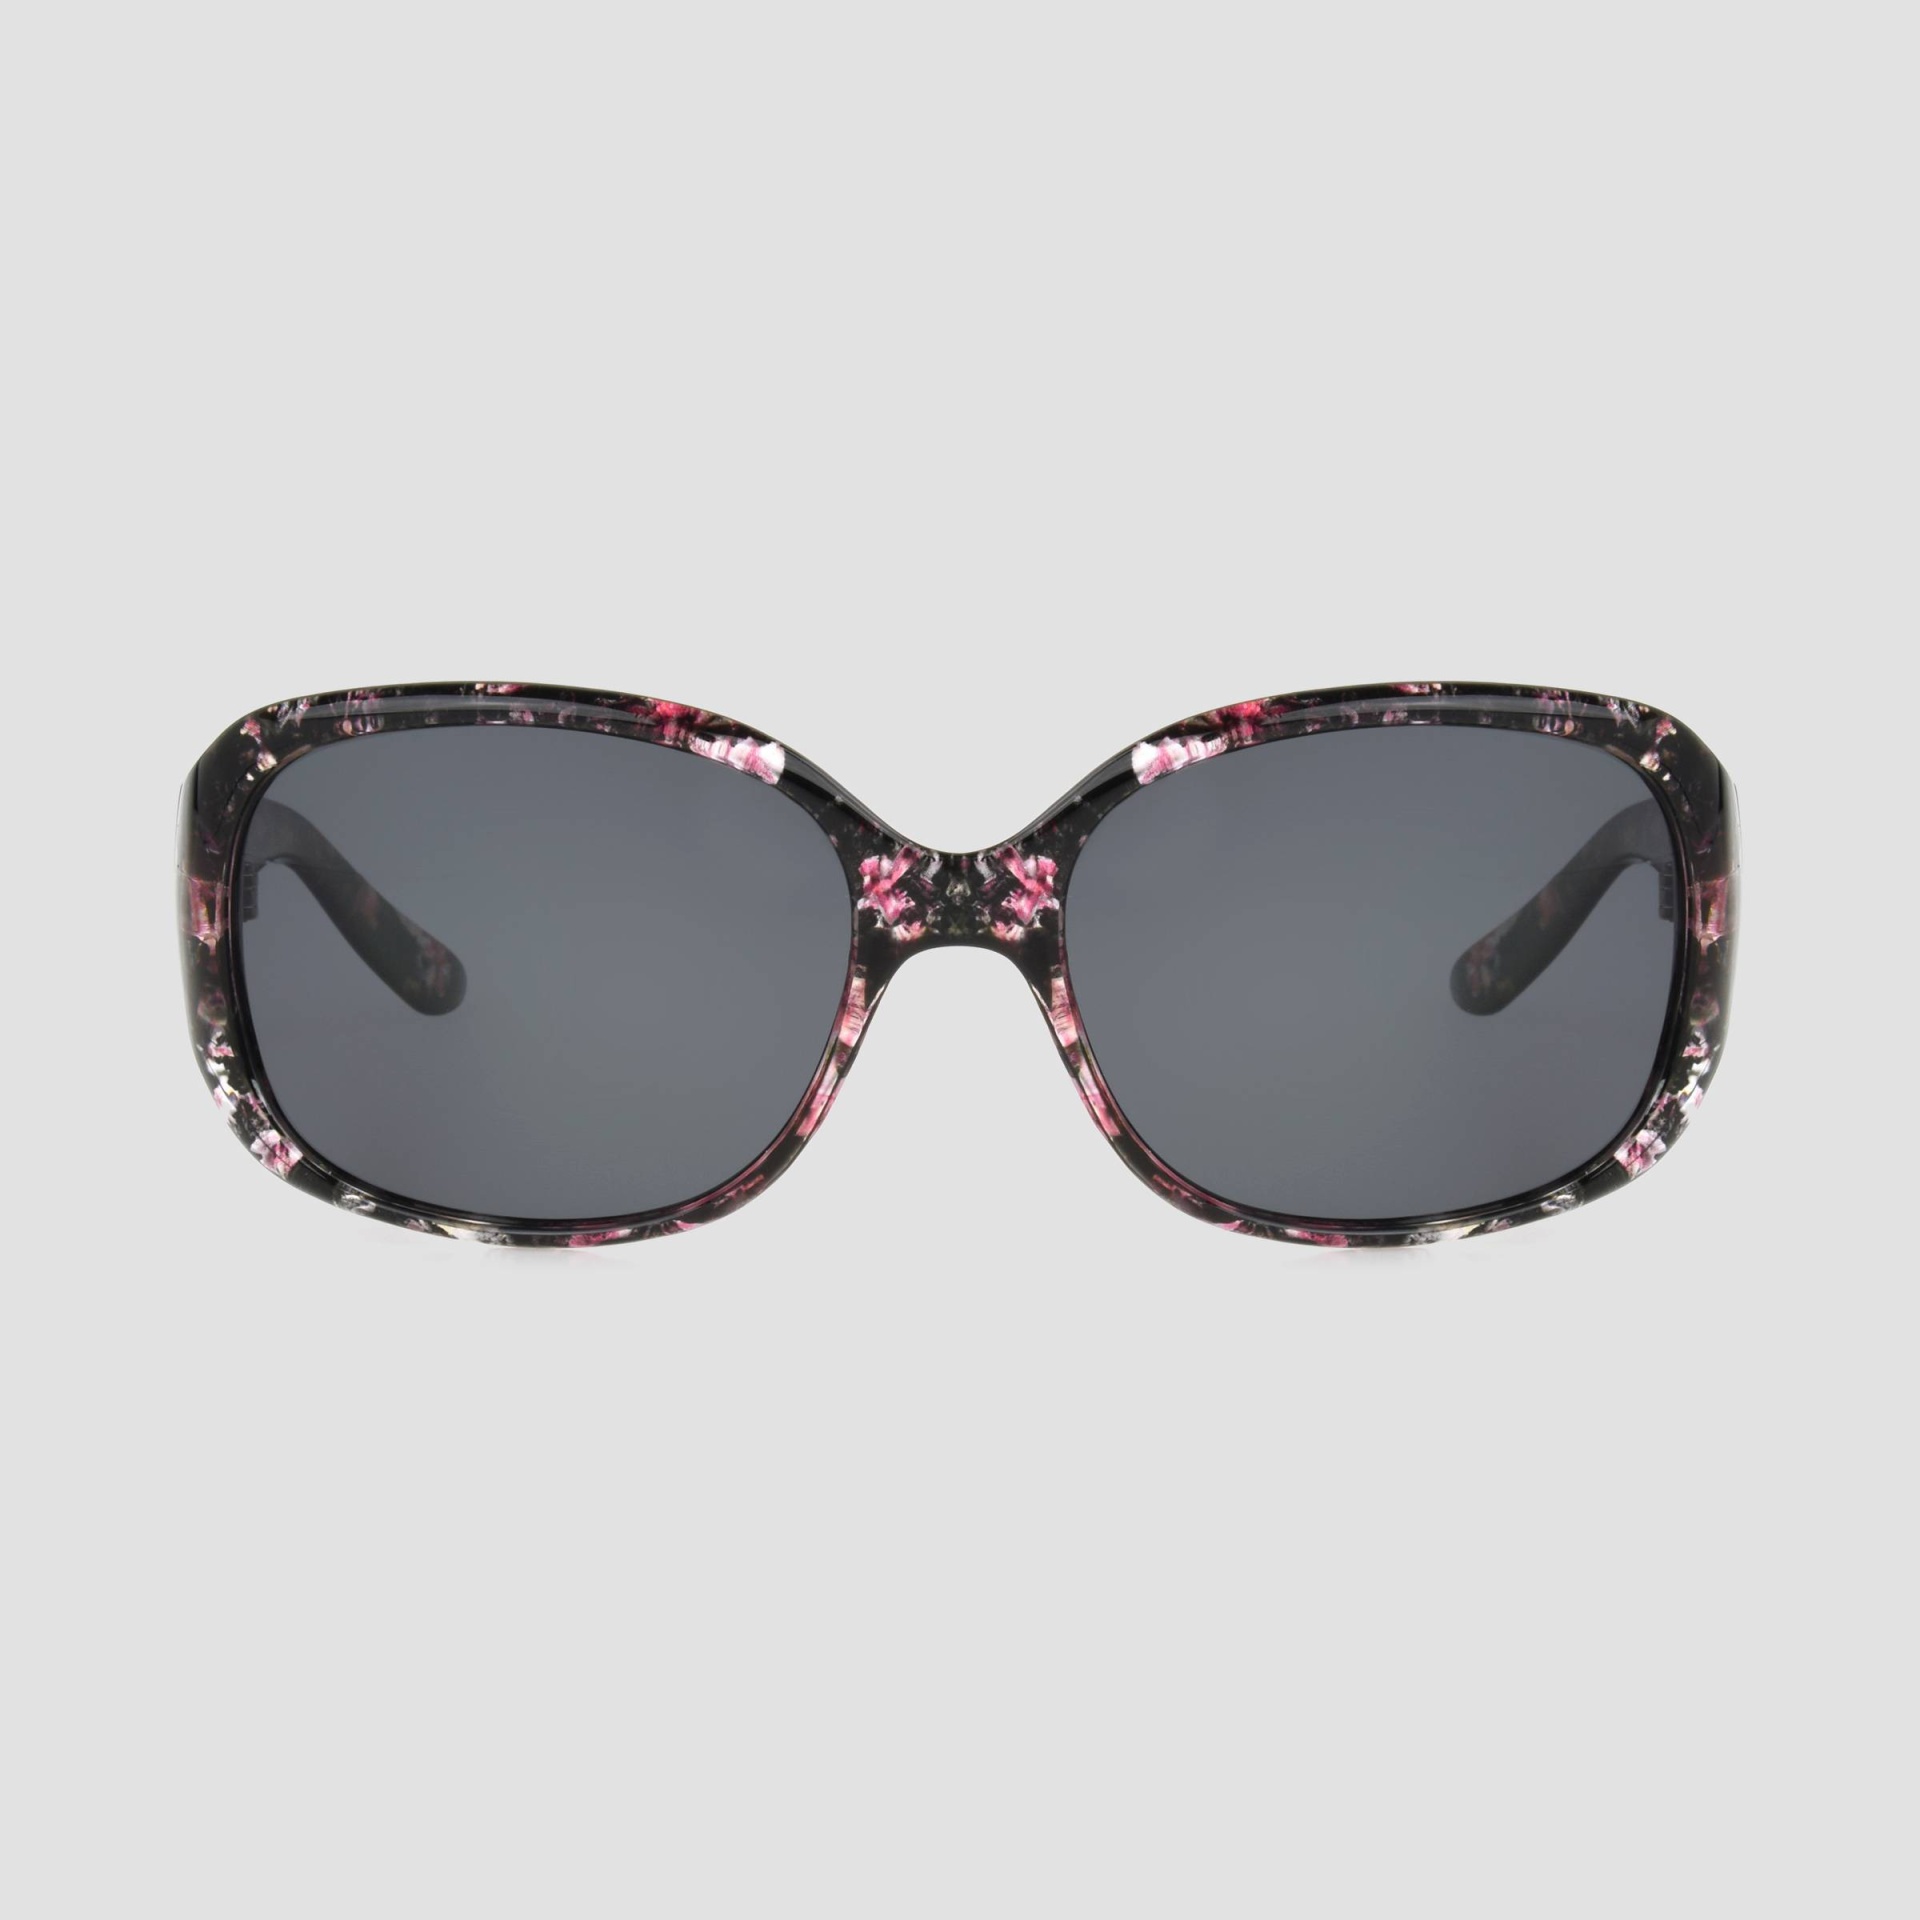 slide 1 of 2, Women's Floral Print Square Polarized Sunglasses - A New Day Black/Pink, 1 ct